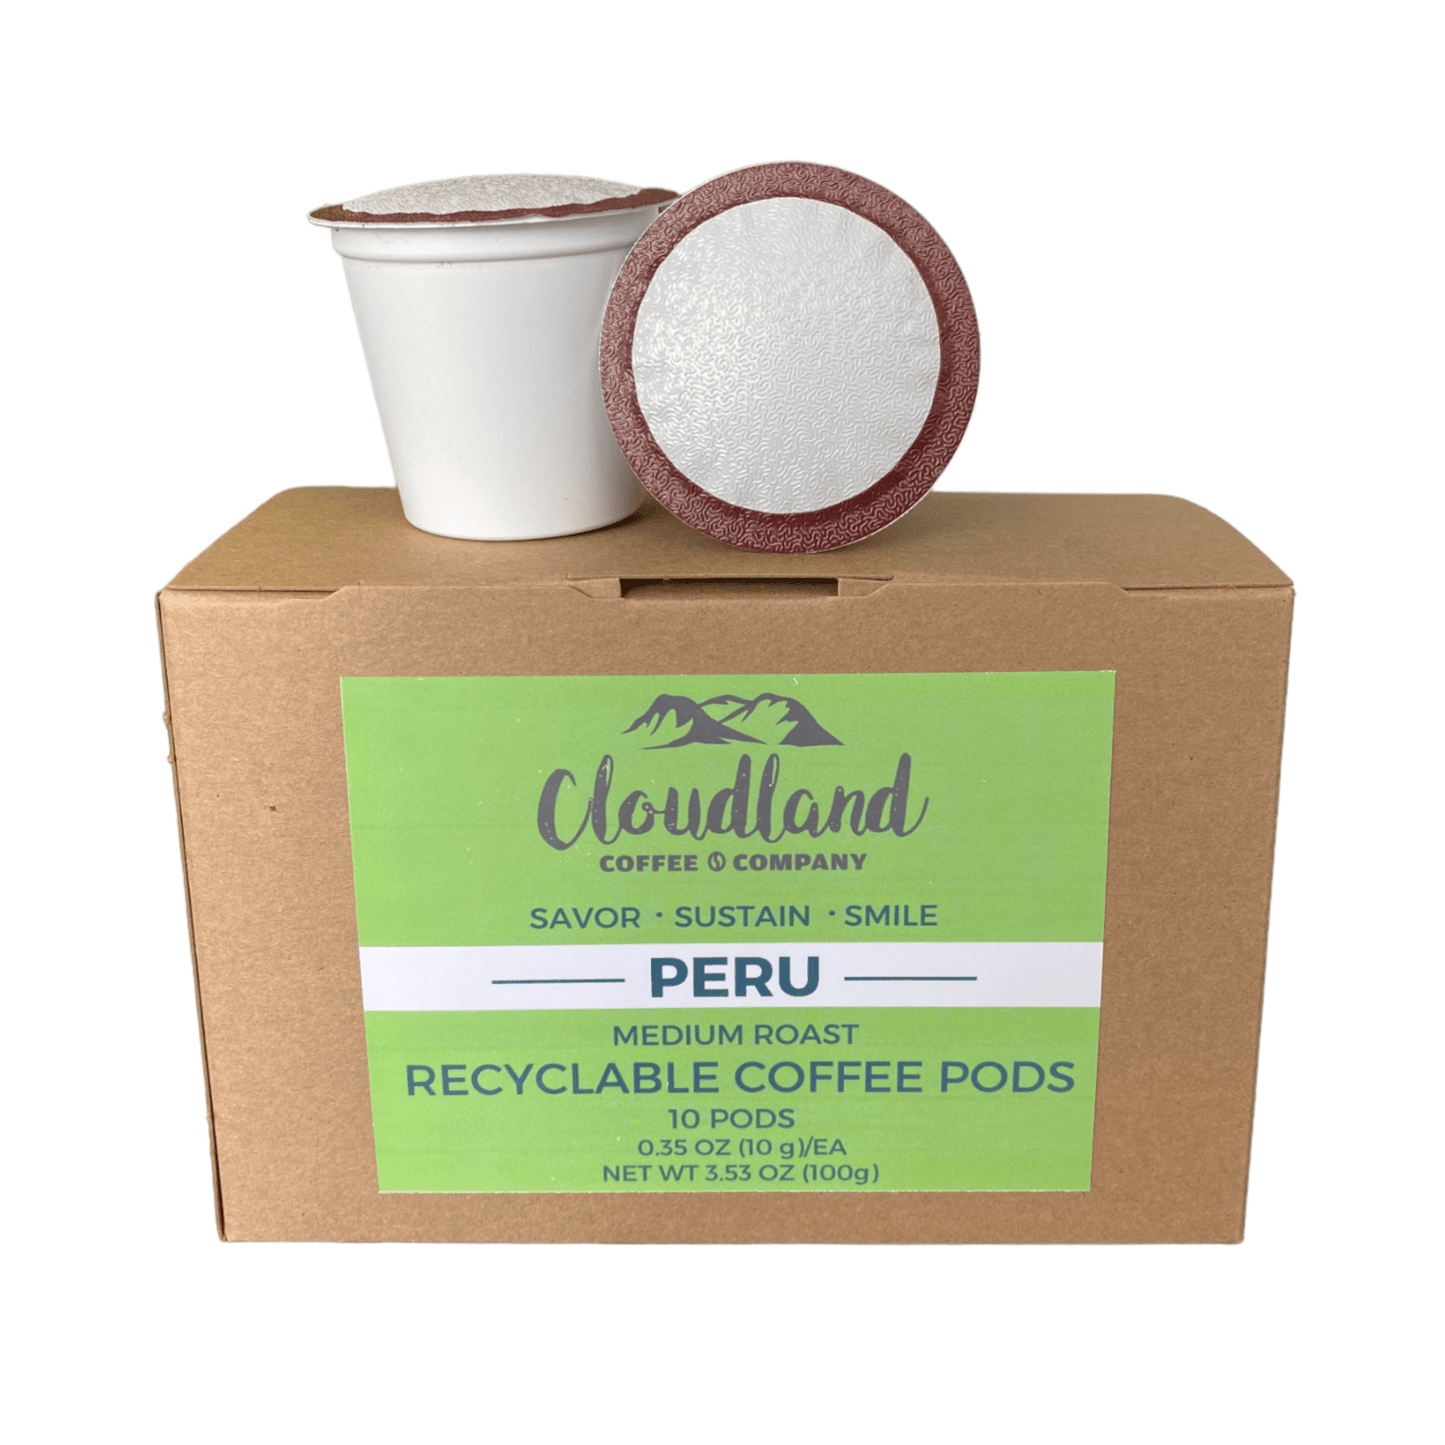 Peru Recyclable Coffee Pods